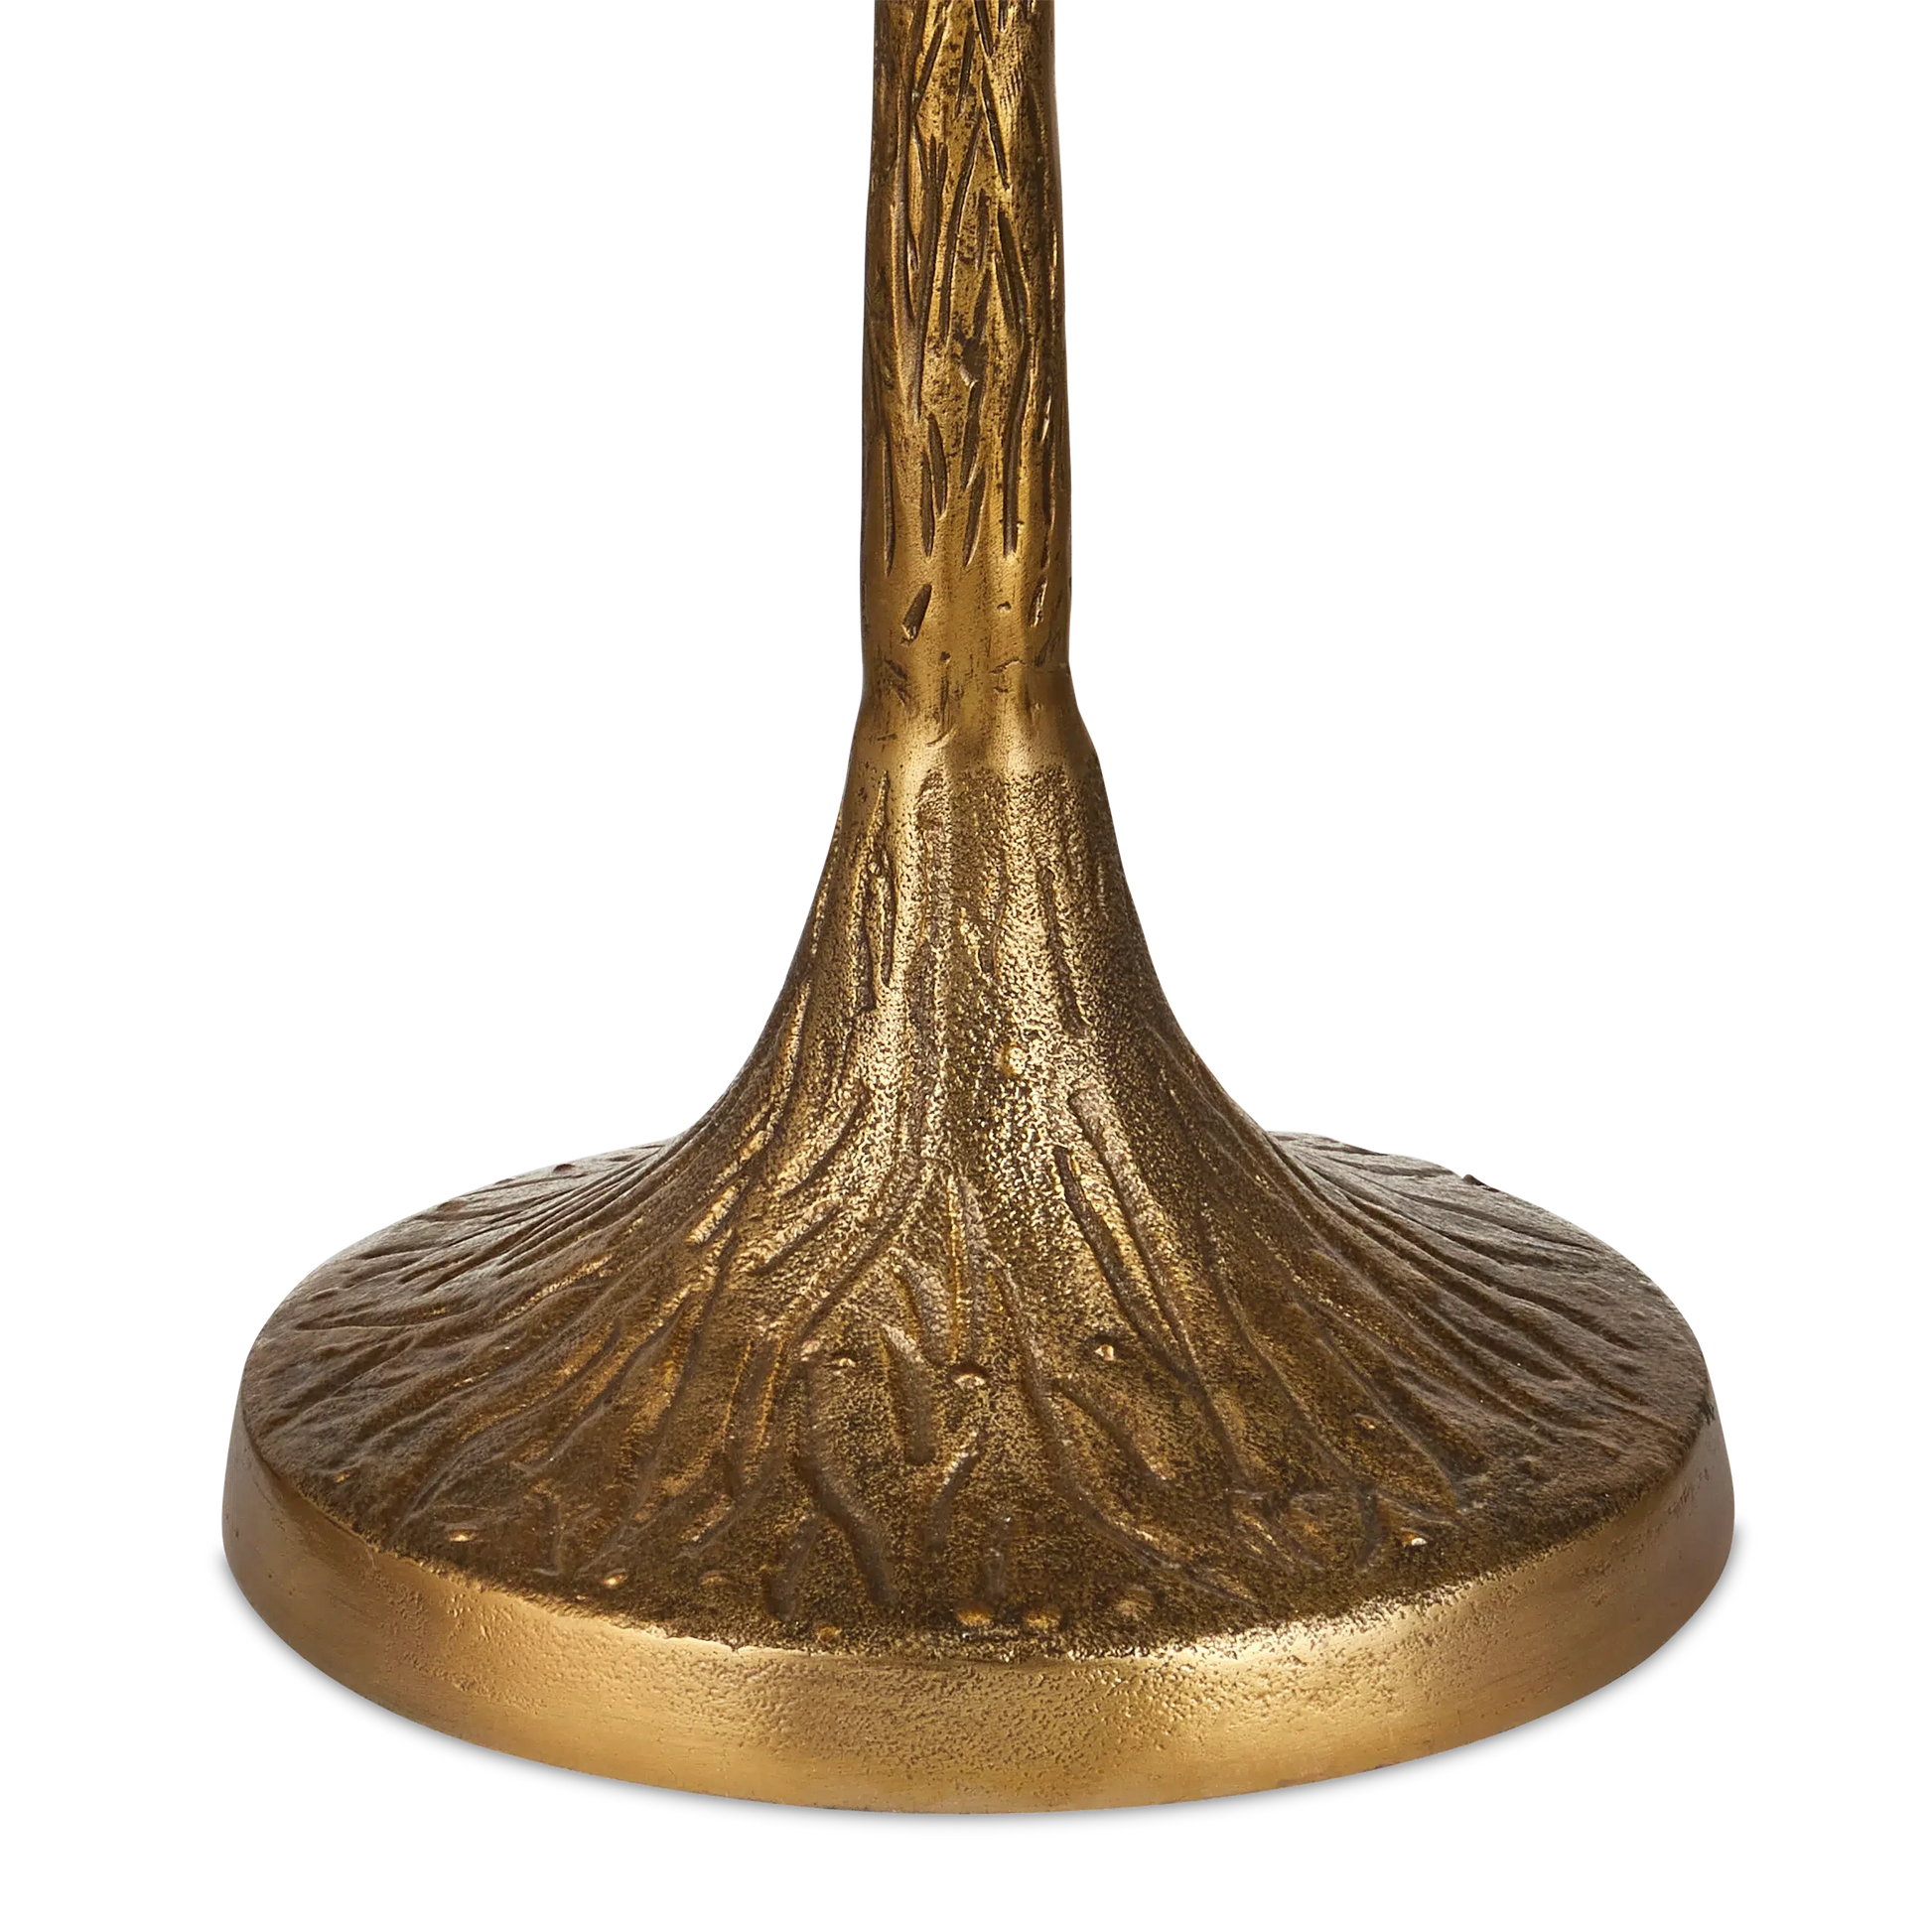 Piaf Brass Floor Lamp-Floor Lamps-Currey & Co-Sideboards and Things